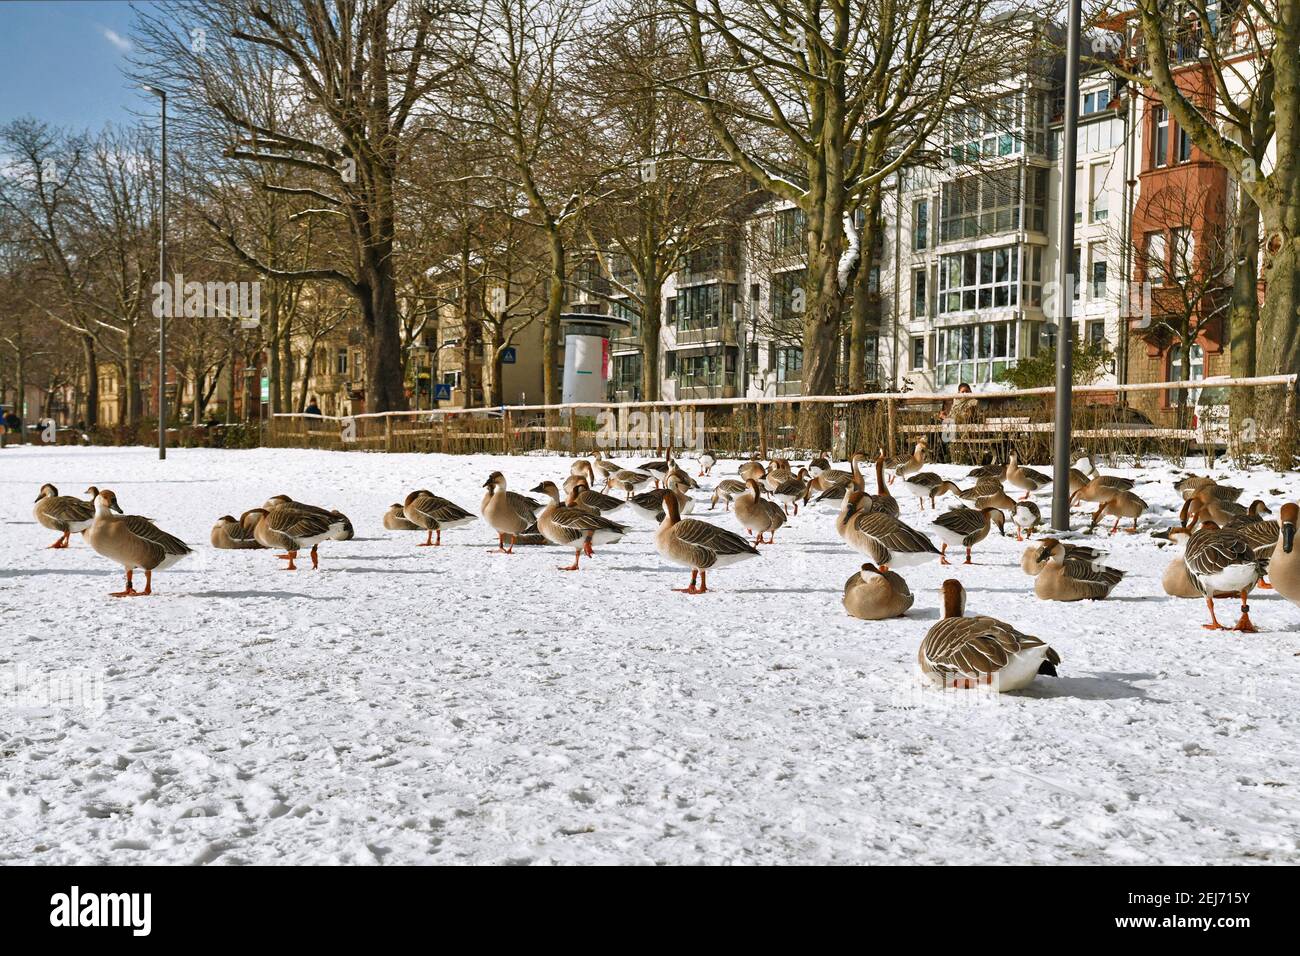 Heidelberg, Germany - February 2021: Flock of swan gooses on lower Neckar river bank called 'Neckarwiese' with meadow covered in snow Stock Photo